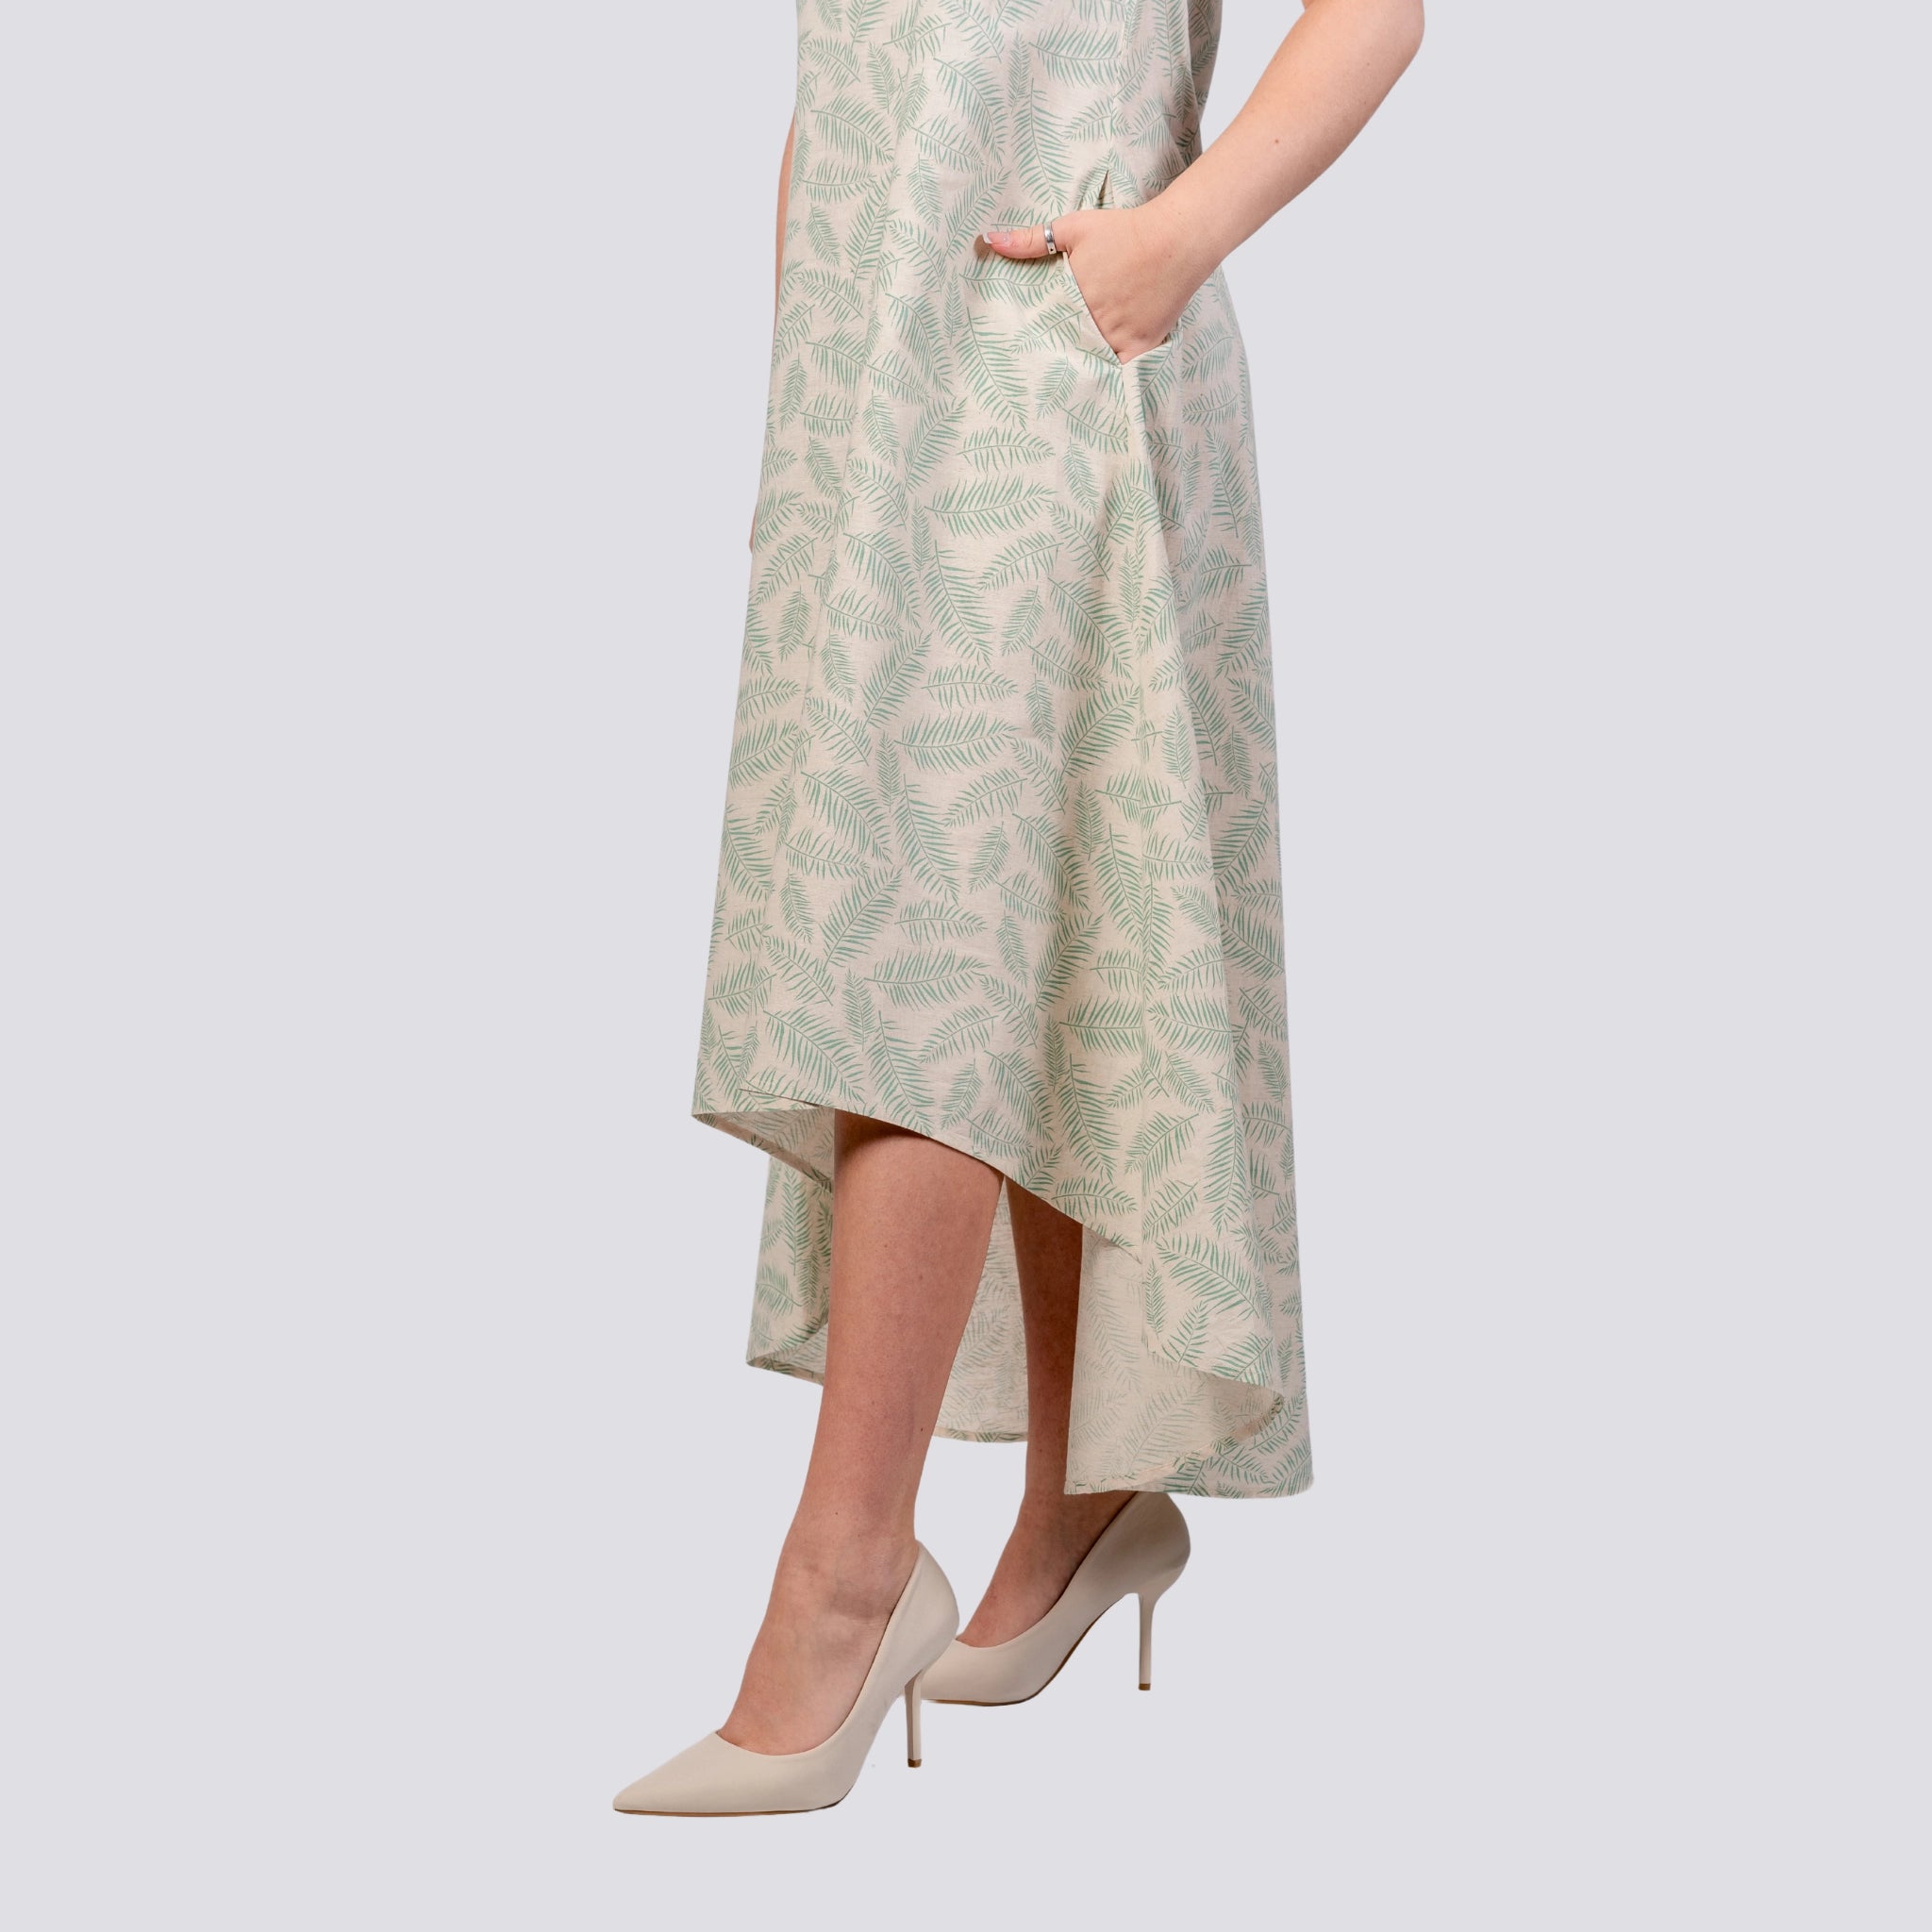 A person wearing a light-colored Karee Eco-Luxe Look: Sustainable Mystic Breeze Linen Hi-Lo Midi Dress for Women with a leaf-patterned design, an asymmetrical high low hemline, and white high-heeled shoes, standing against a light gray background.